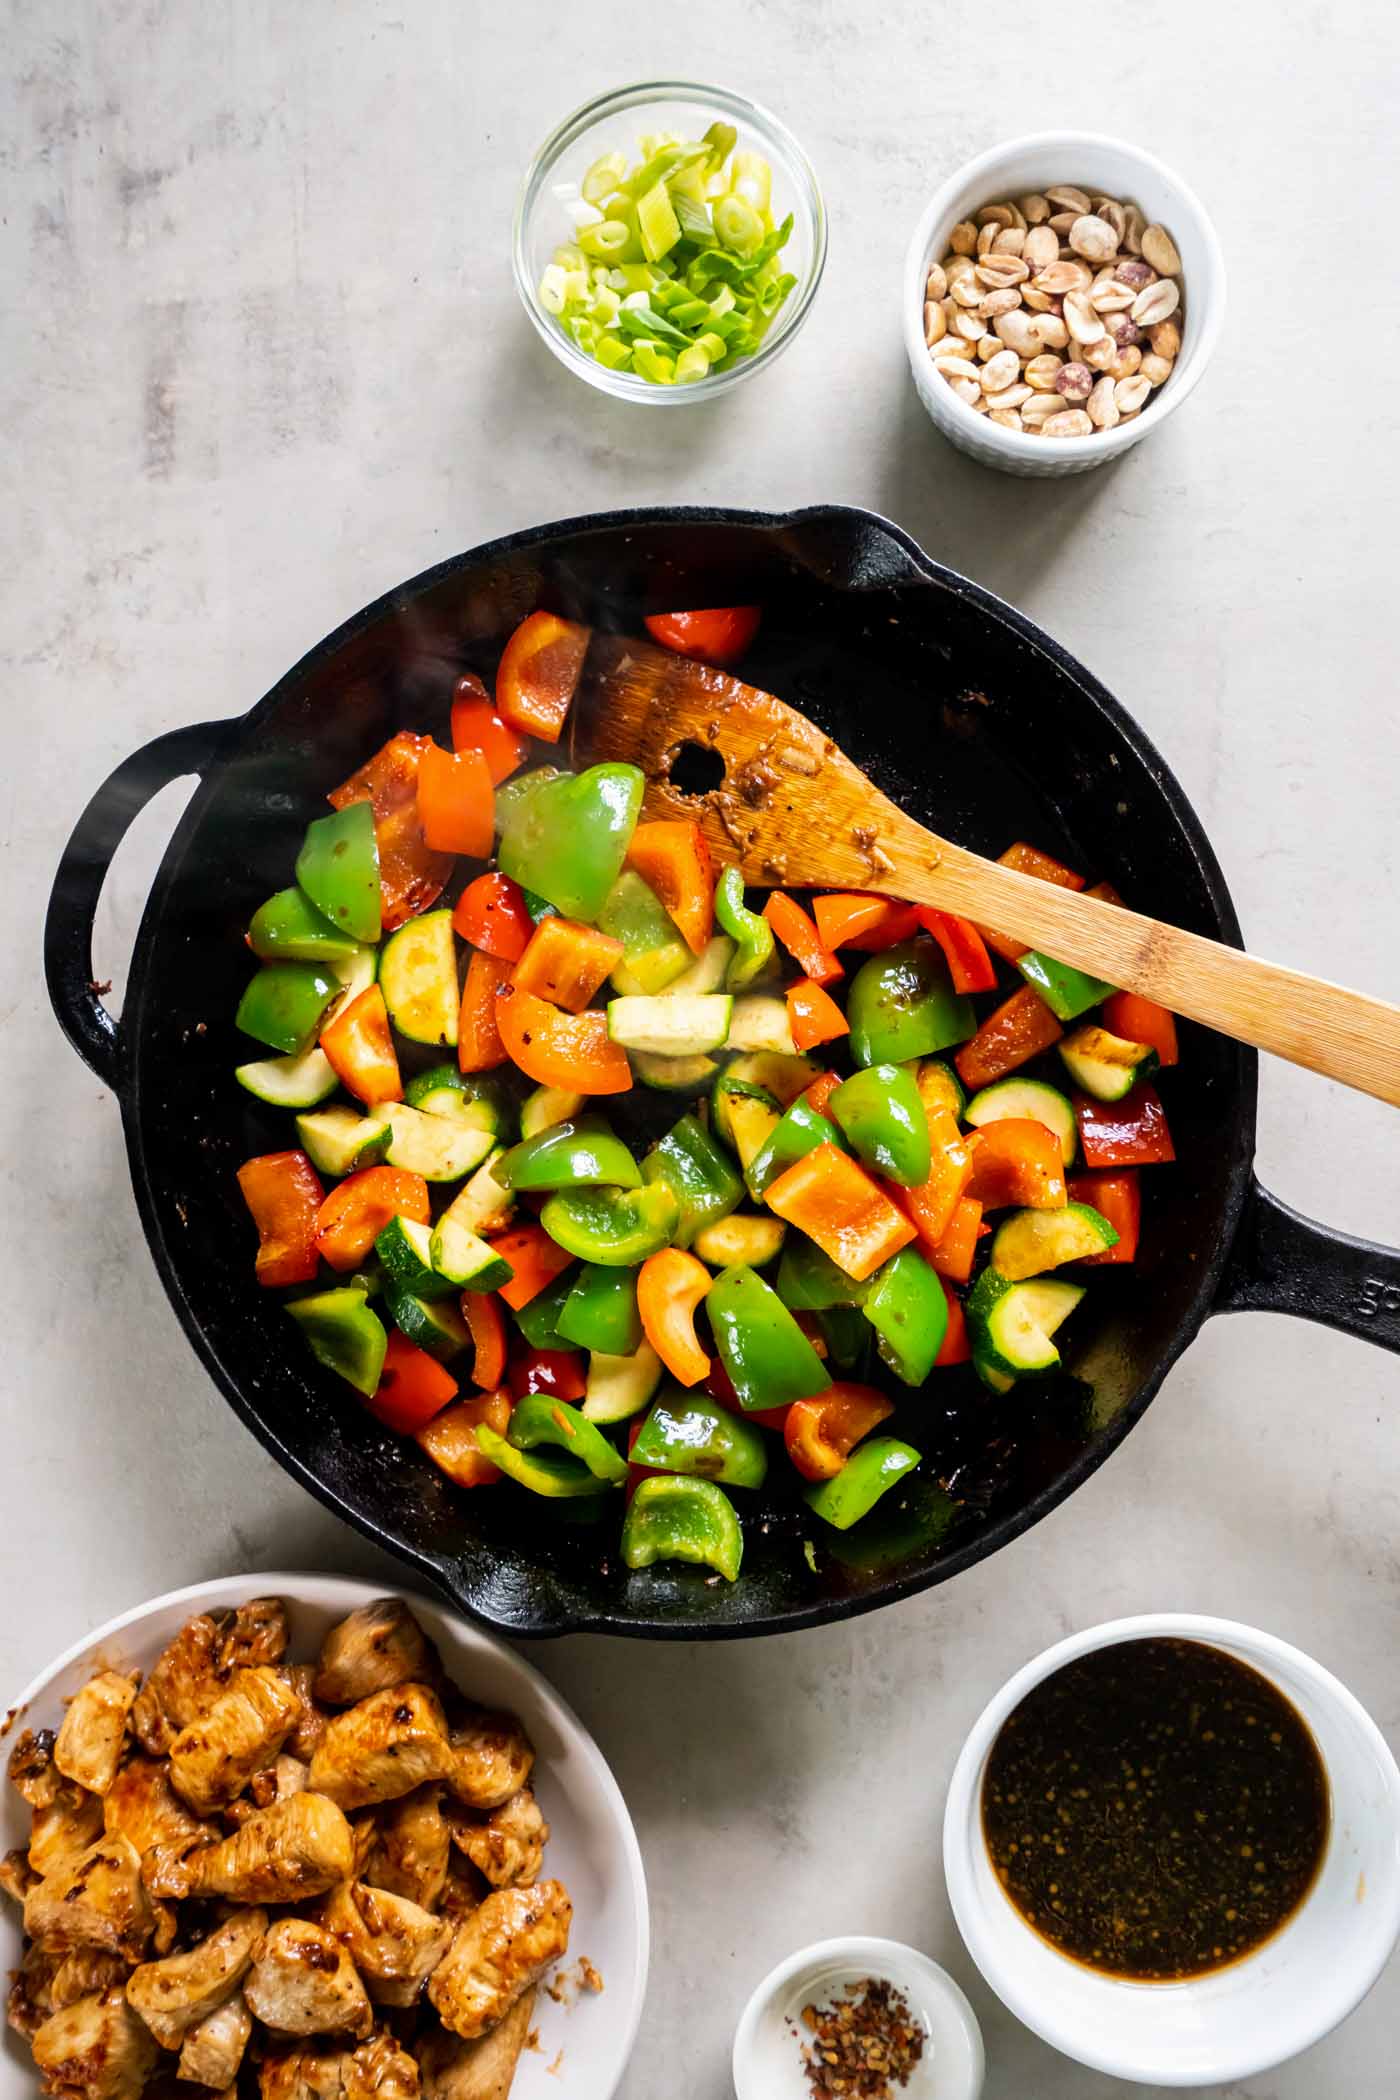 Stir fried bell peppers and zucchini in skillet.